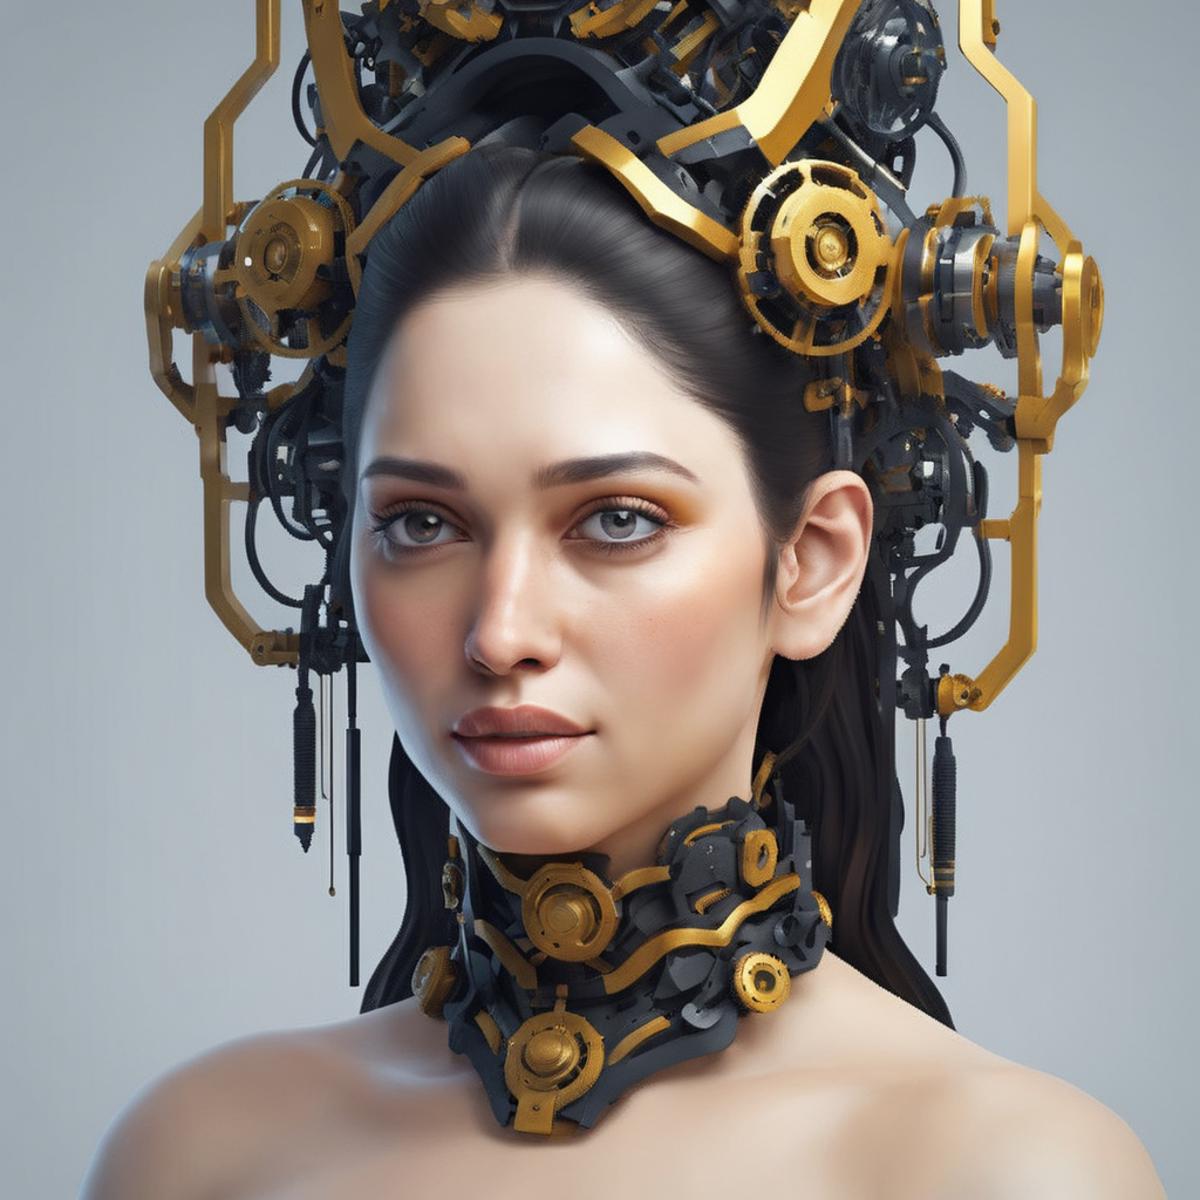 AI model image by mrghostrider